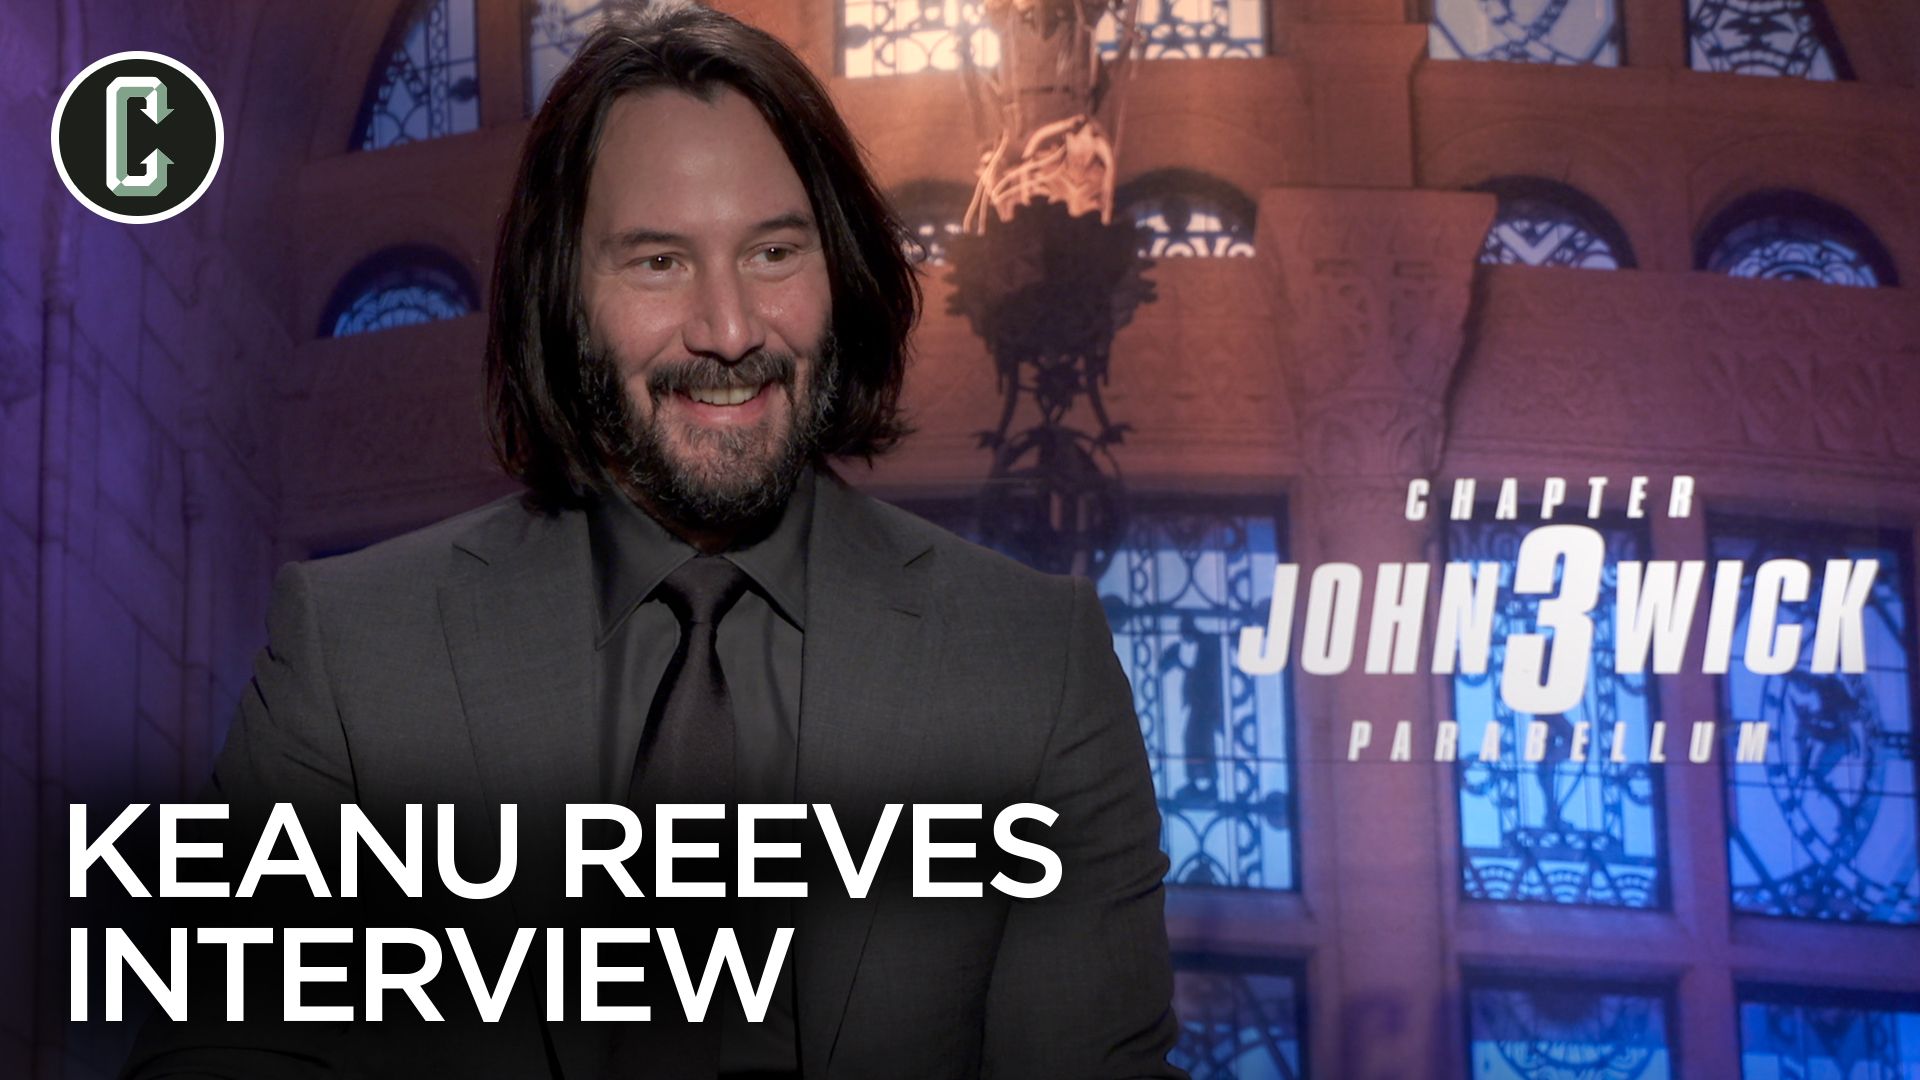 Keanu Reeves on John Wick 3 and Killing an NBA Player With a Book | Collider1920 x 1080